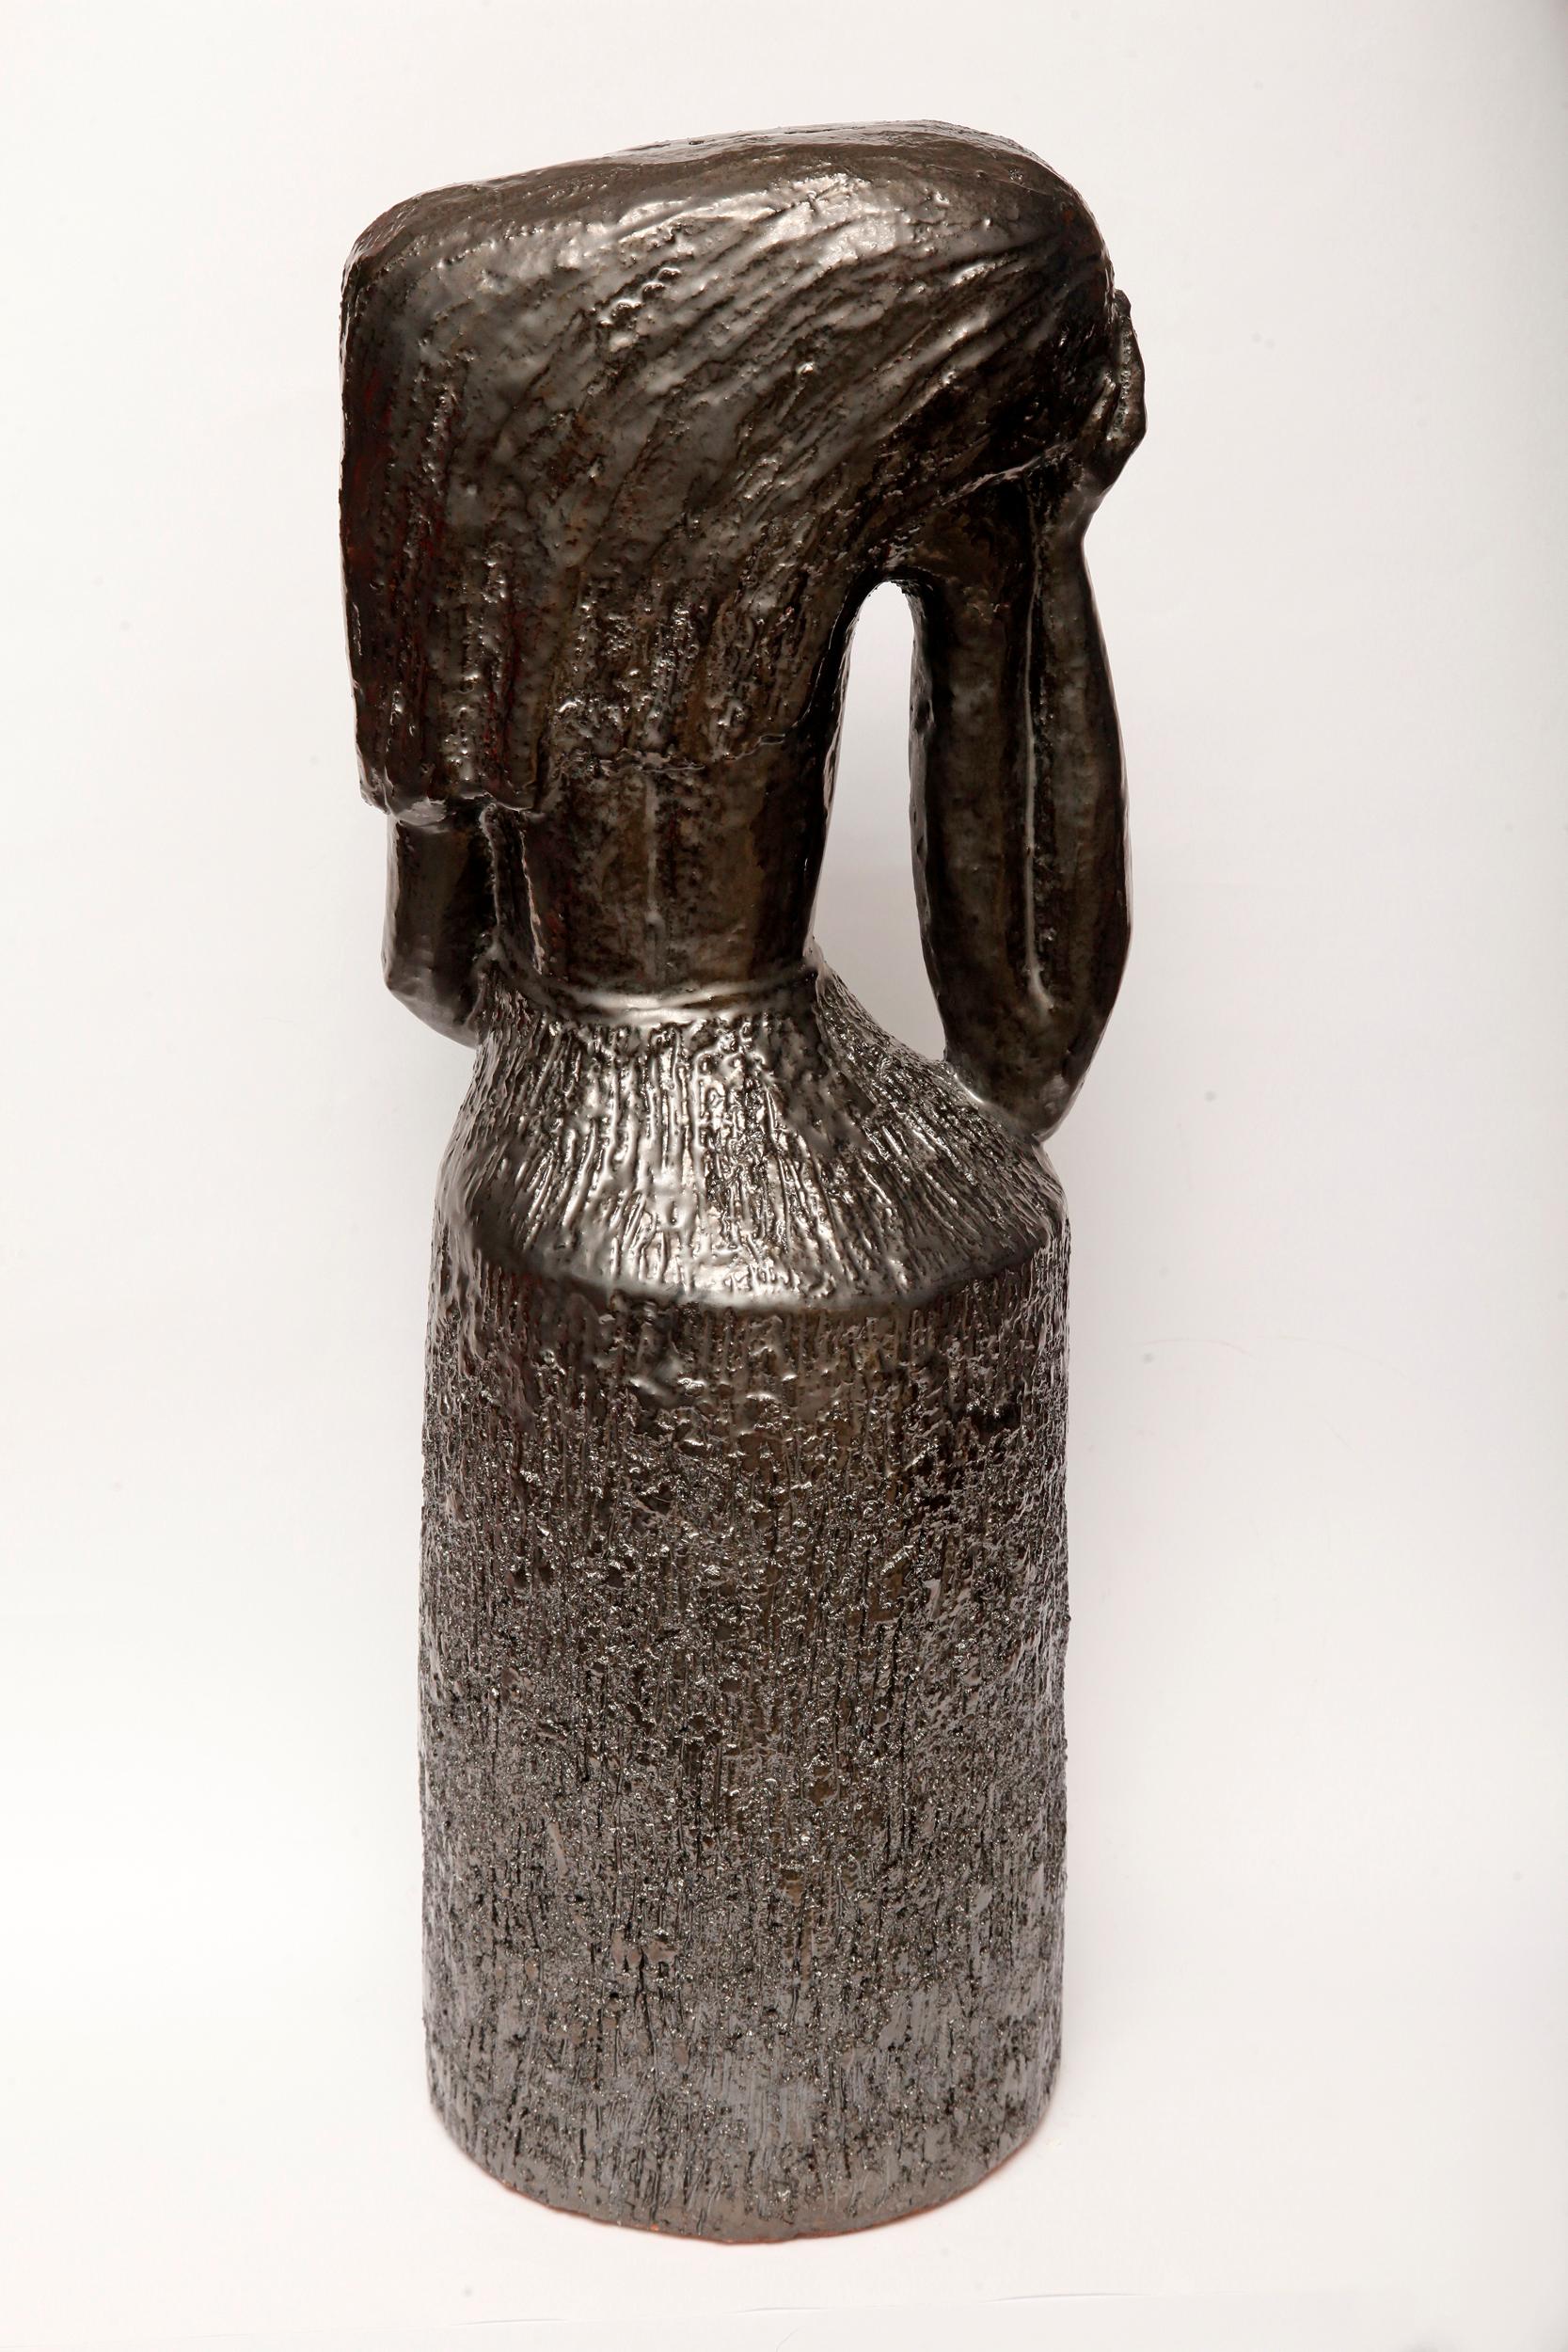 Midcentury Clay and Glazed Sculpture of a Woman, Jerzy Sacha, Poland, 1970s For Sale 7